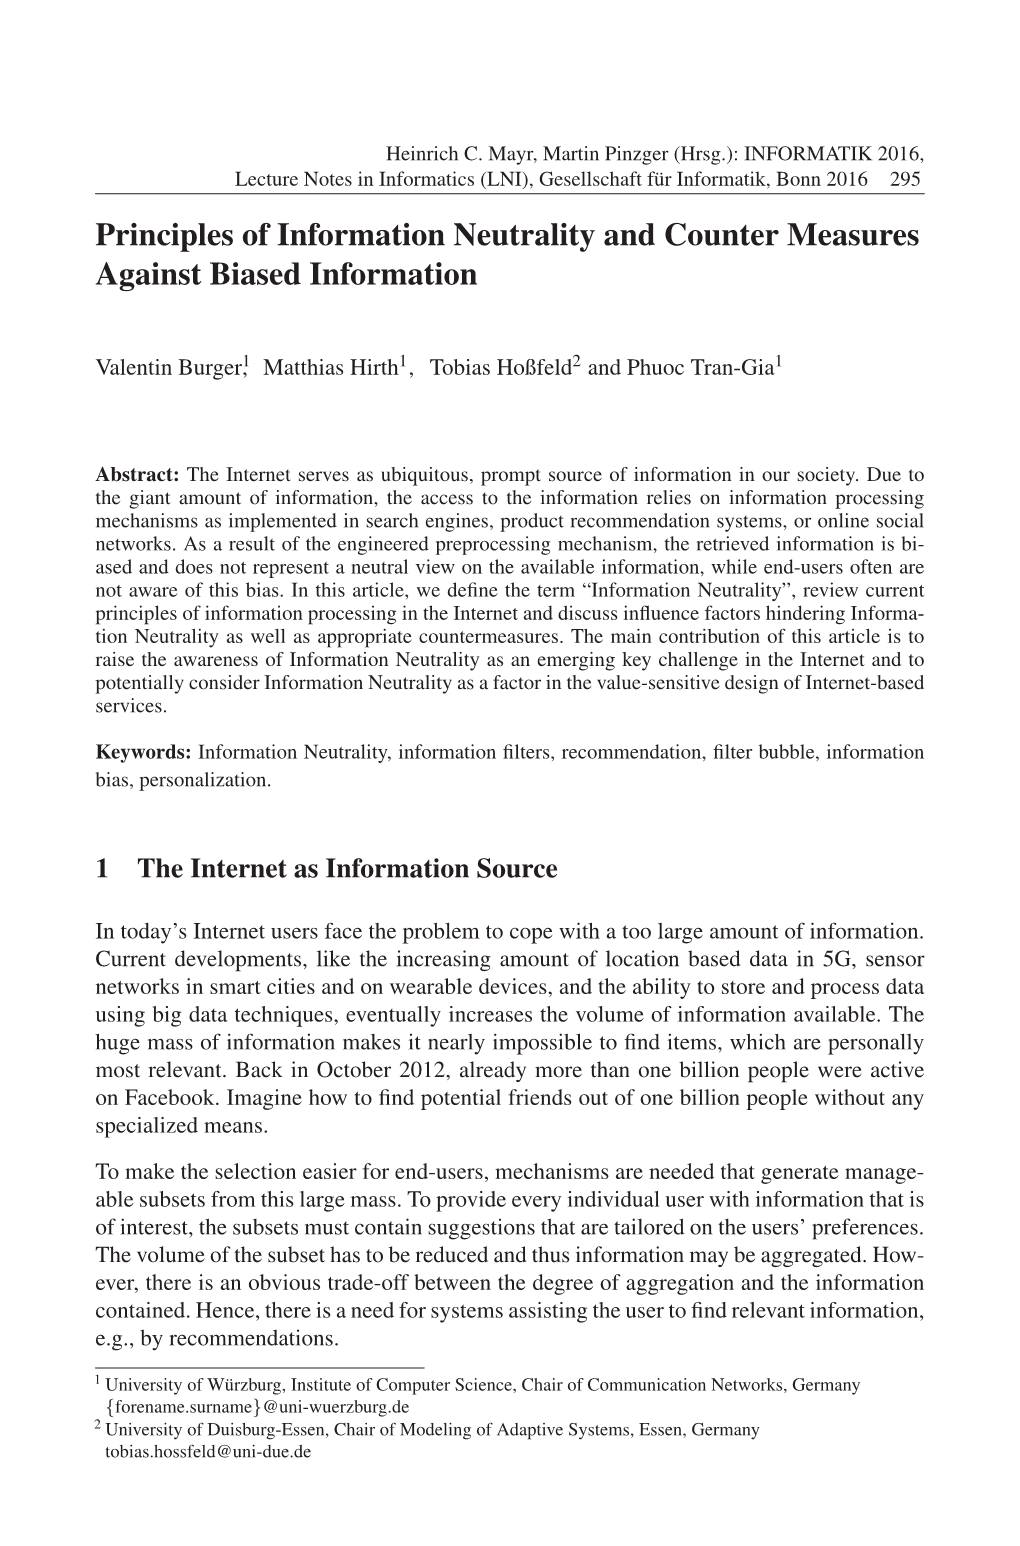 Principles of Information Neutrality and Counter Measures Against Biased Information